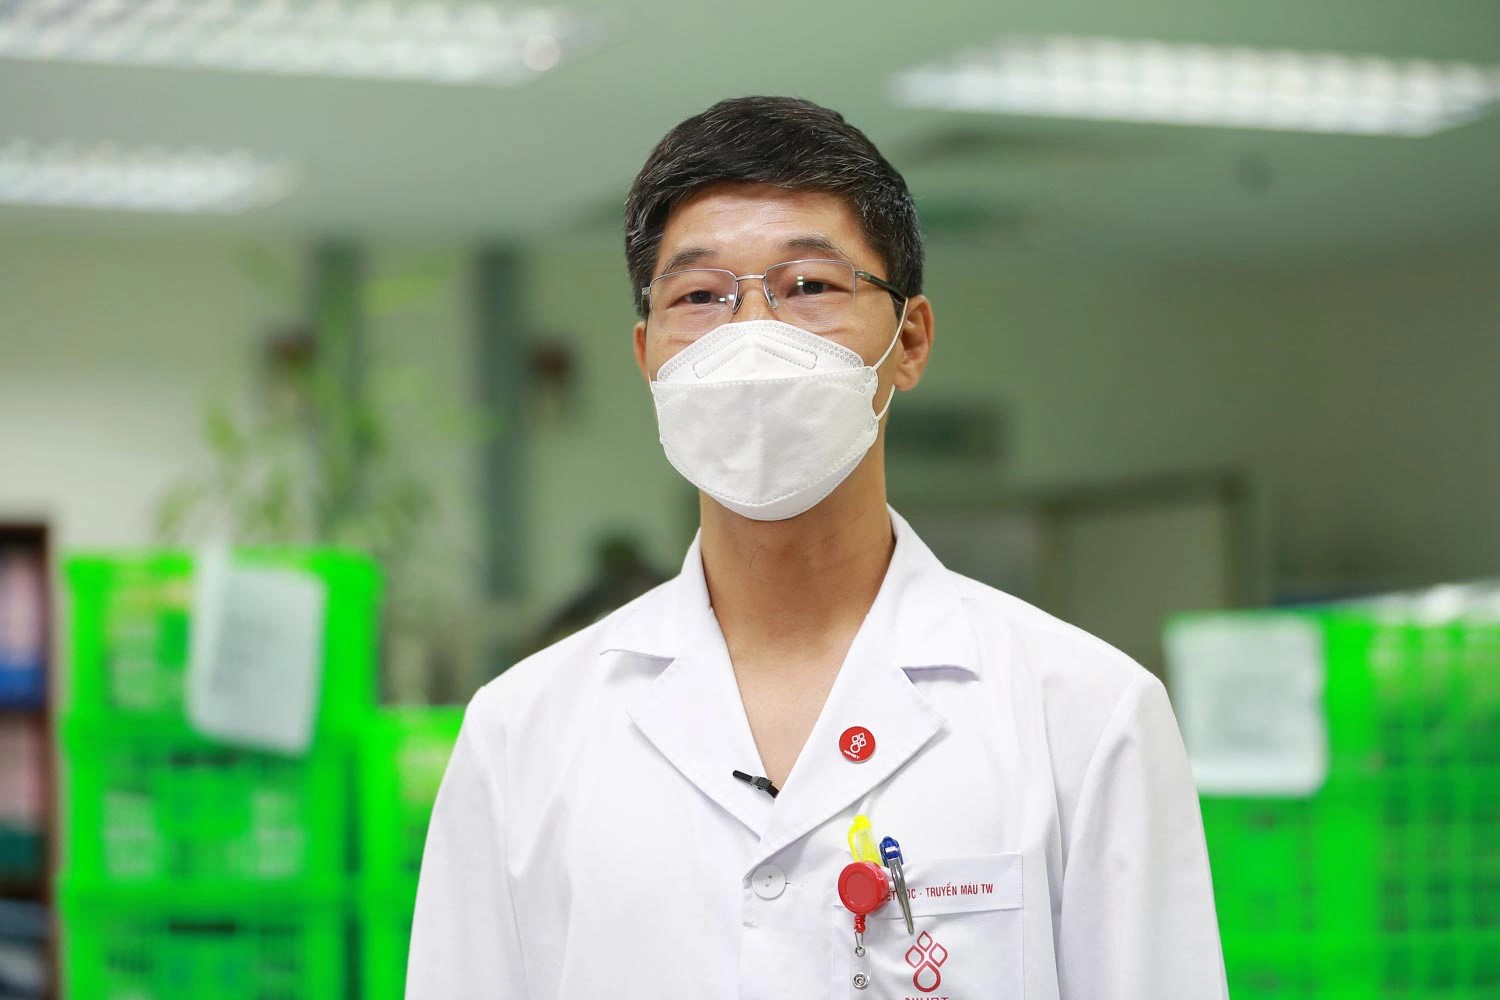 Tran Ngoc Que works as director of the National Blood Center (Central Institute of Hematology and Blood Transfusion). Photo provided